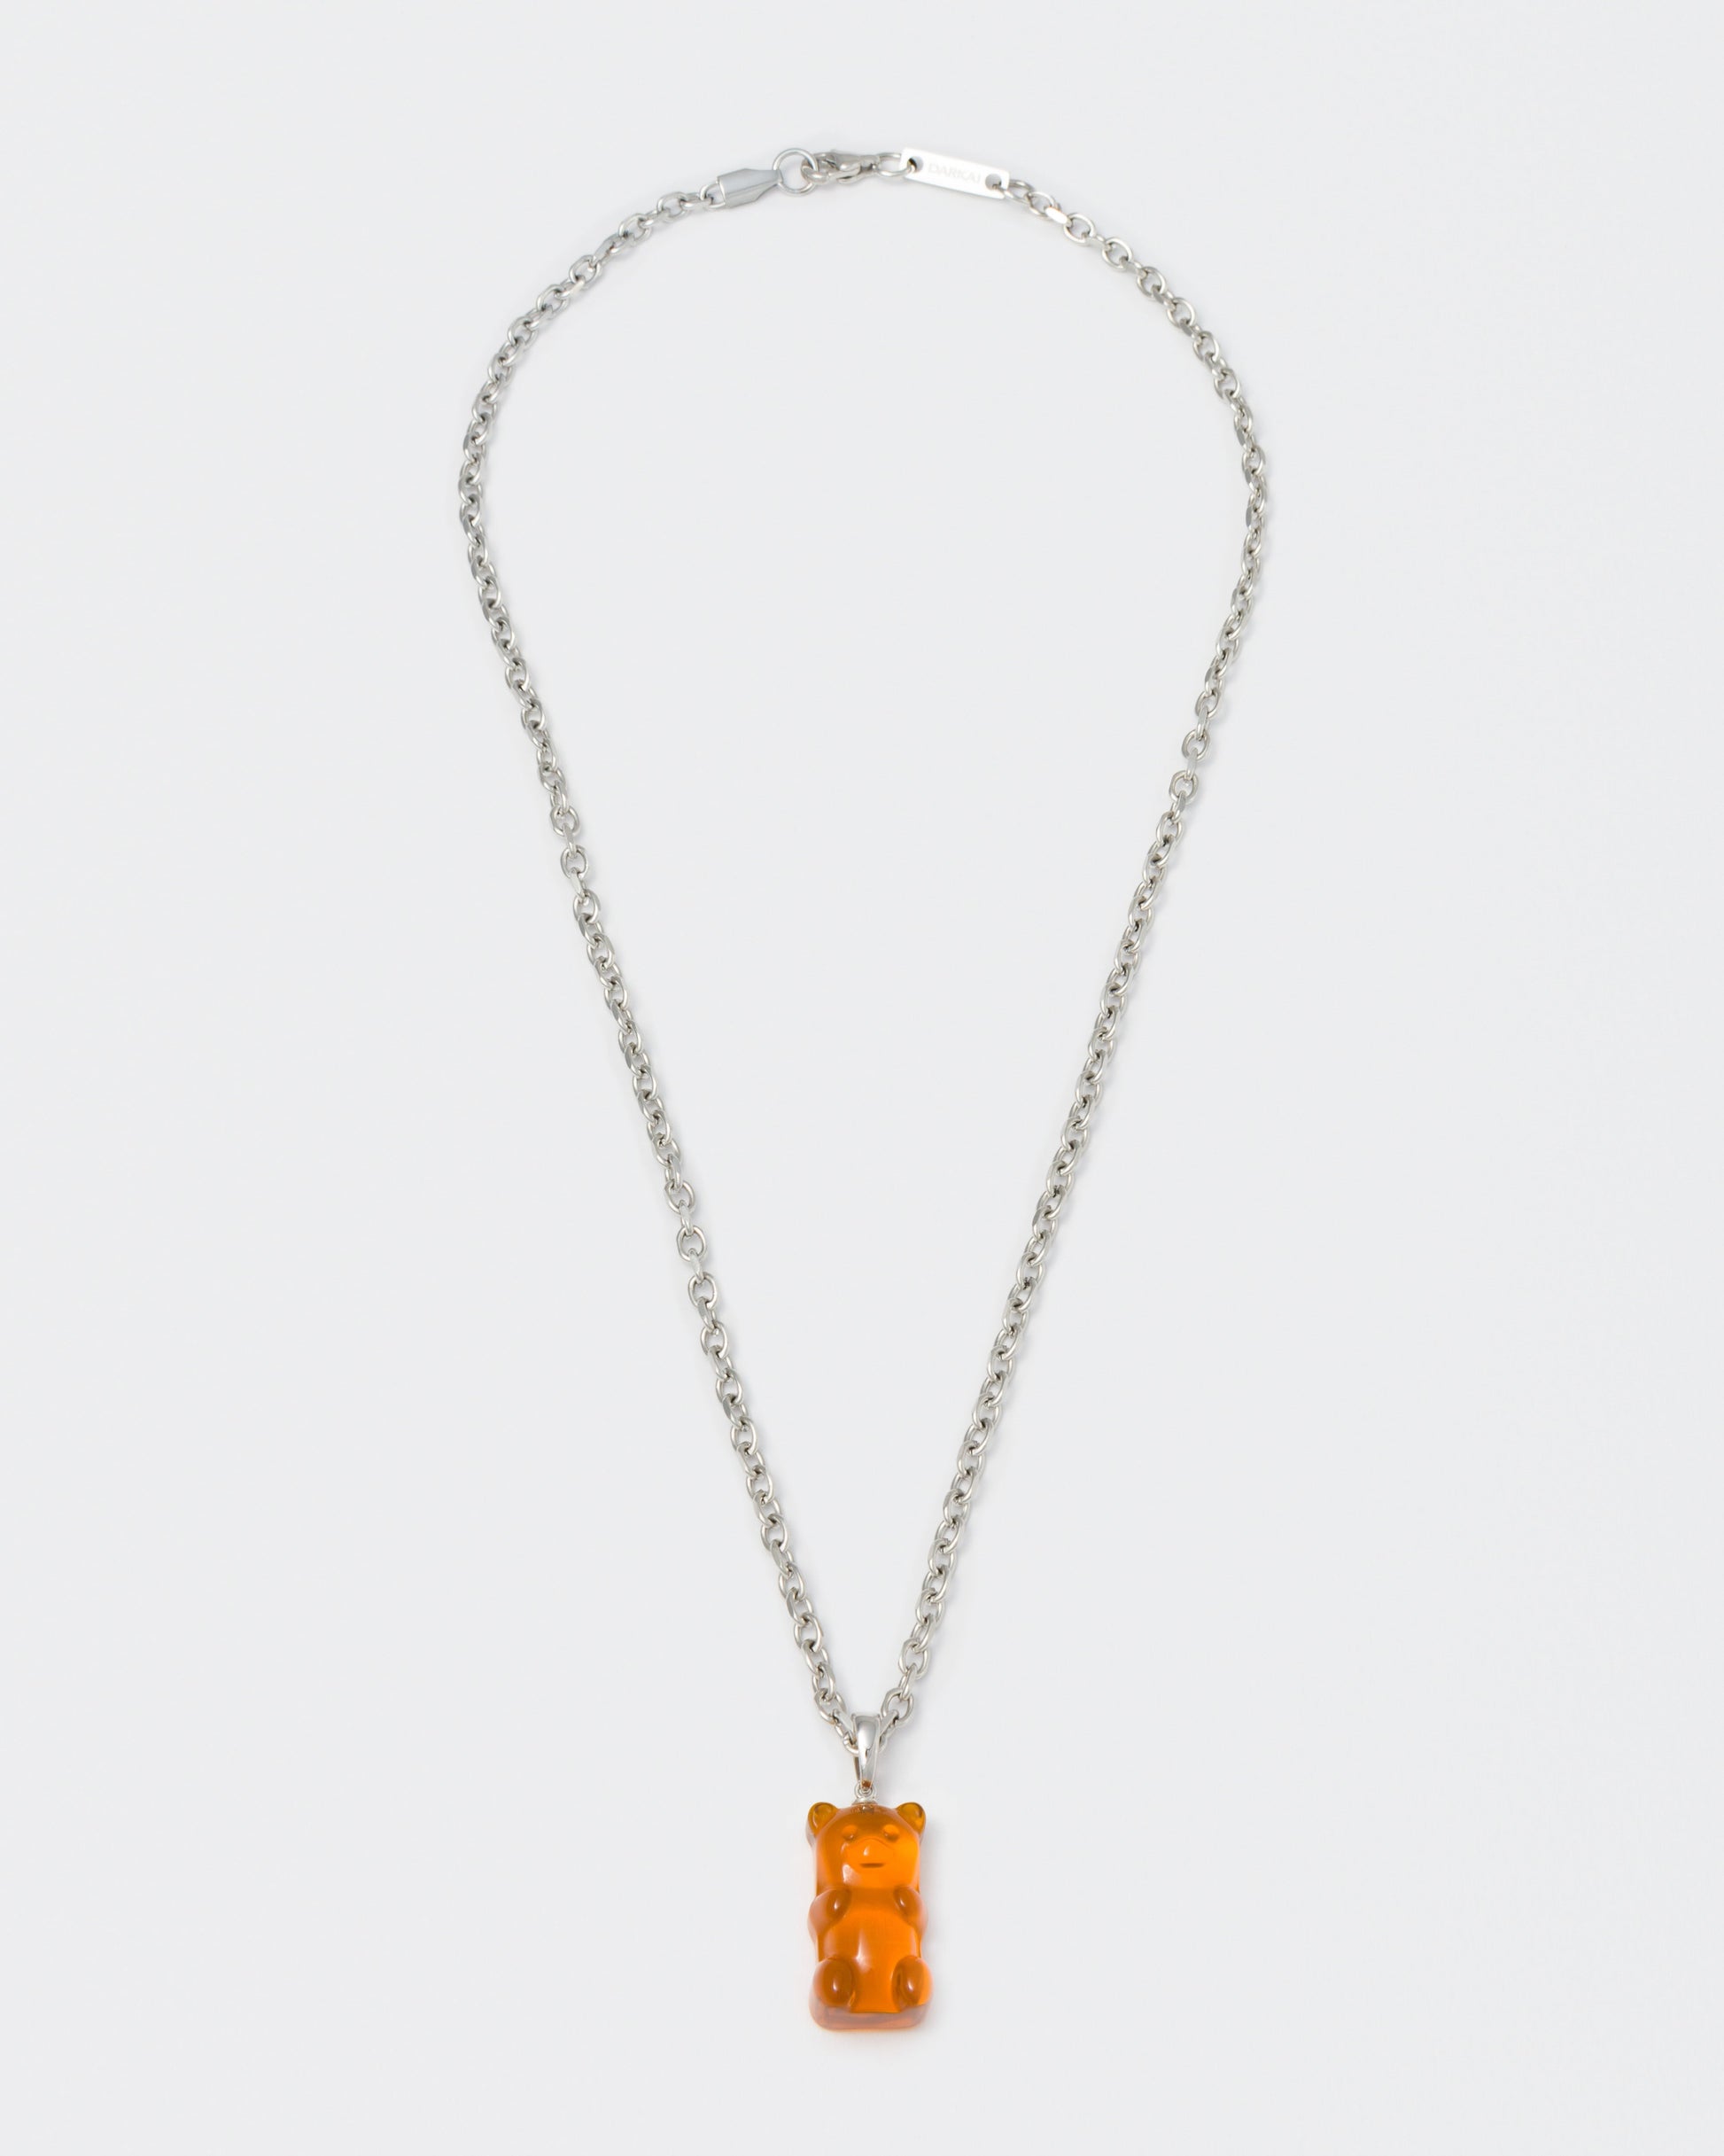 18k white gold coated gummy bear pendant necklace with 3D cut clear crystal in orange and 3mm rolo chain